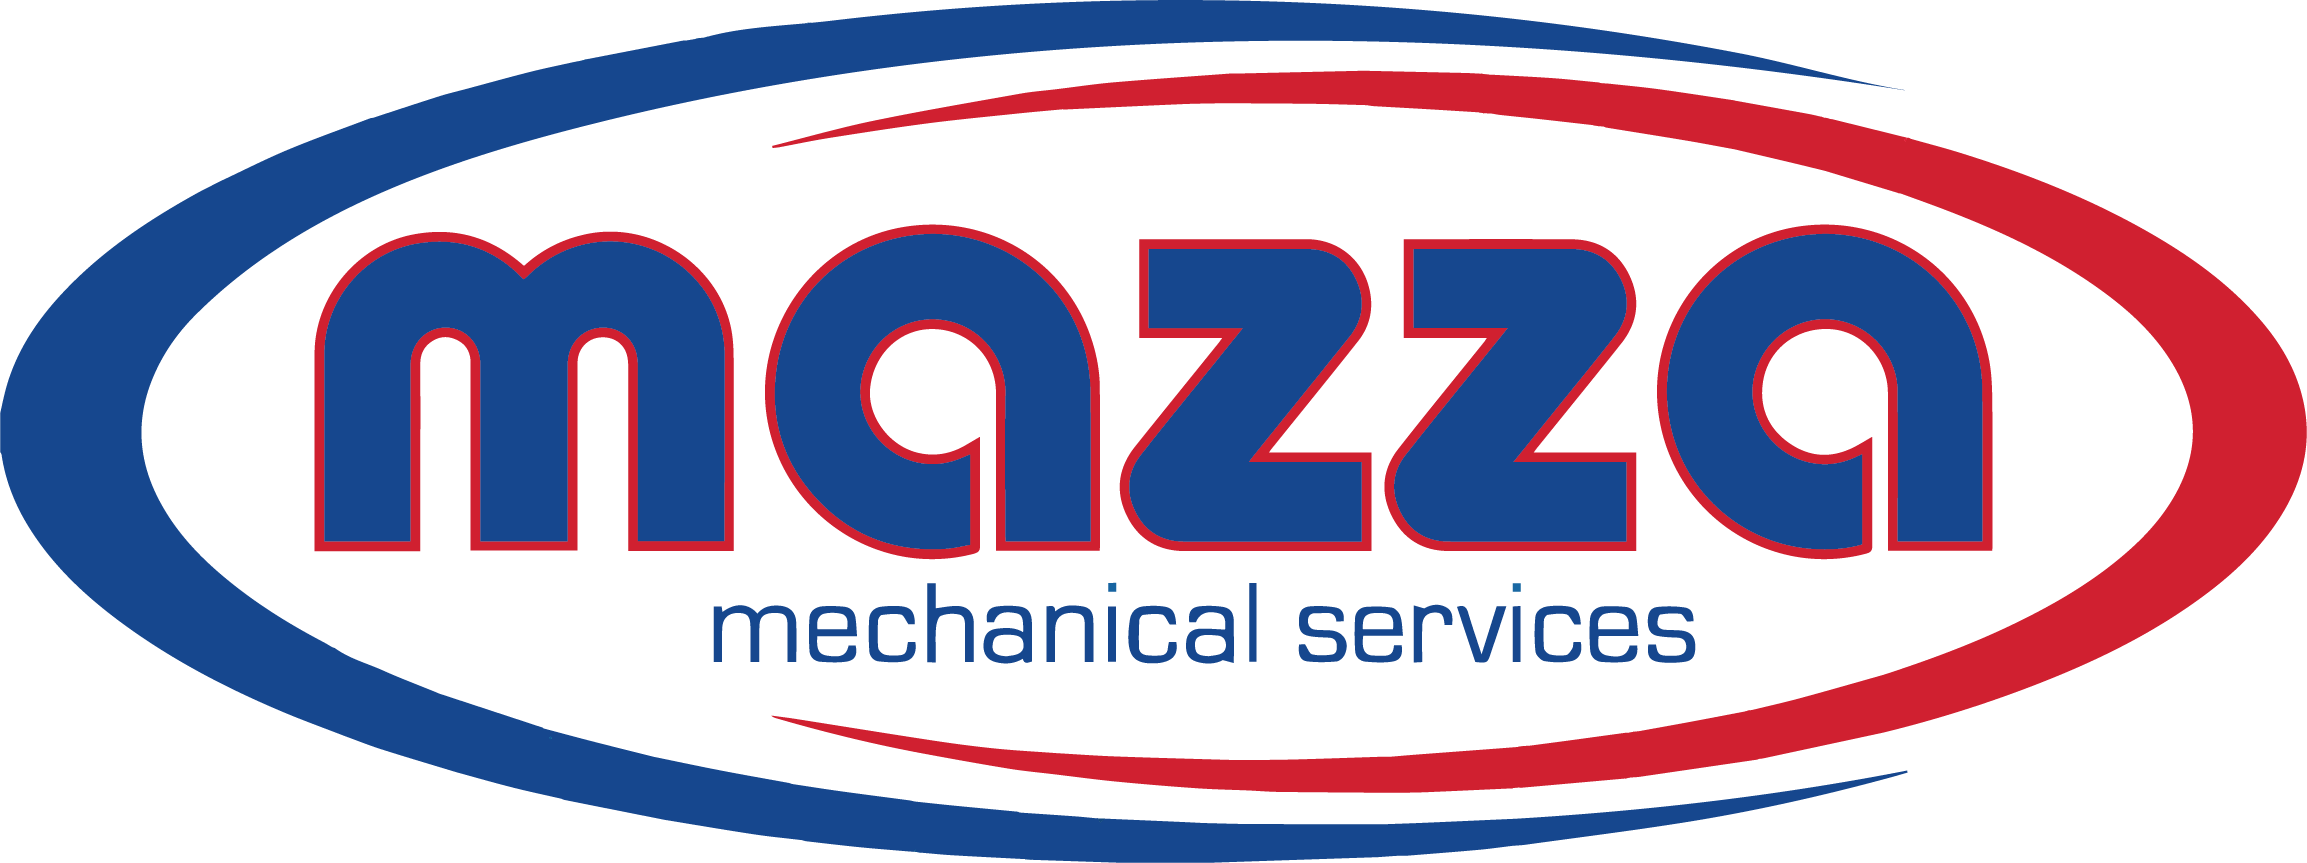 Mazza Mechanical Services full color logo